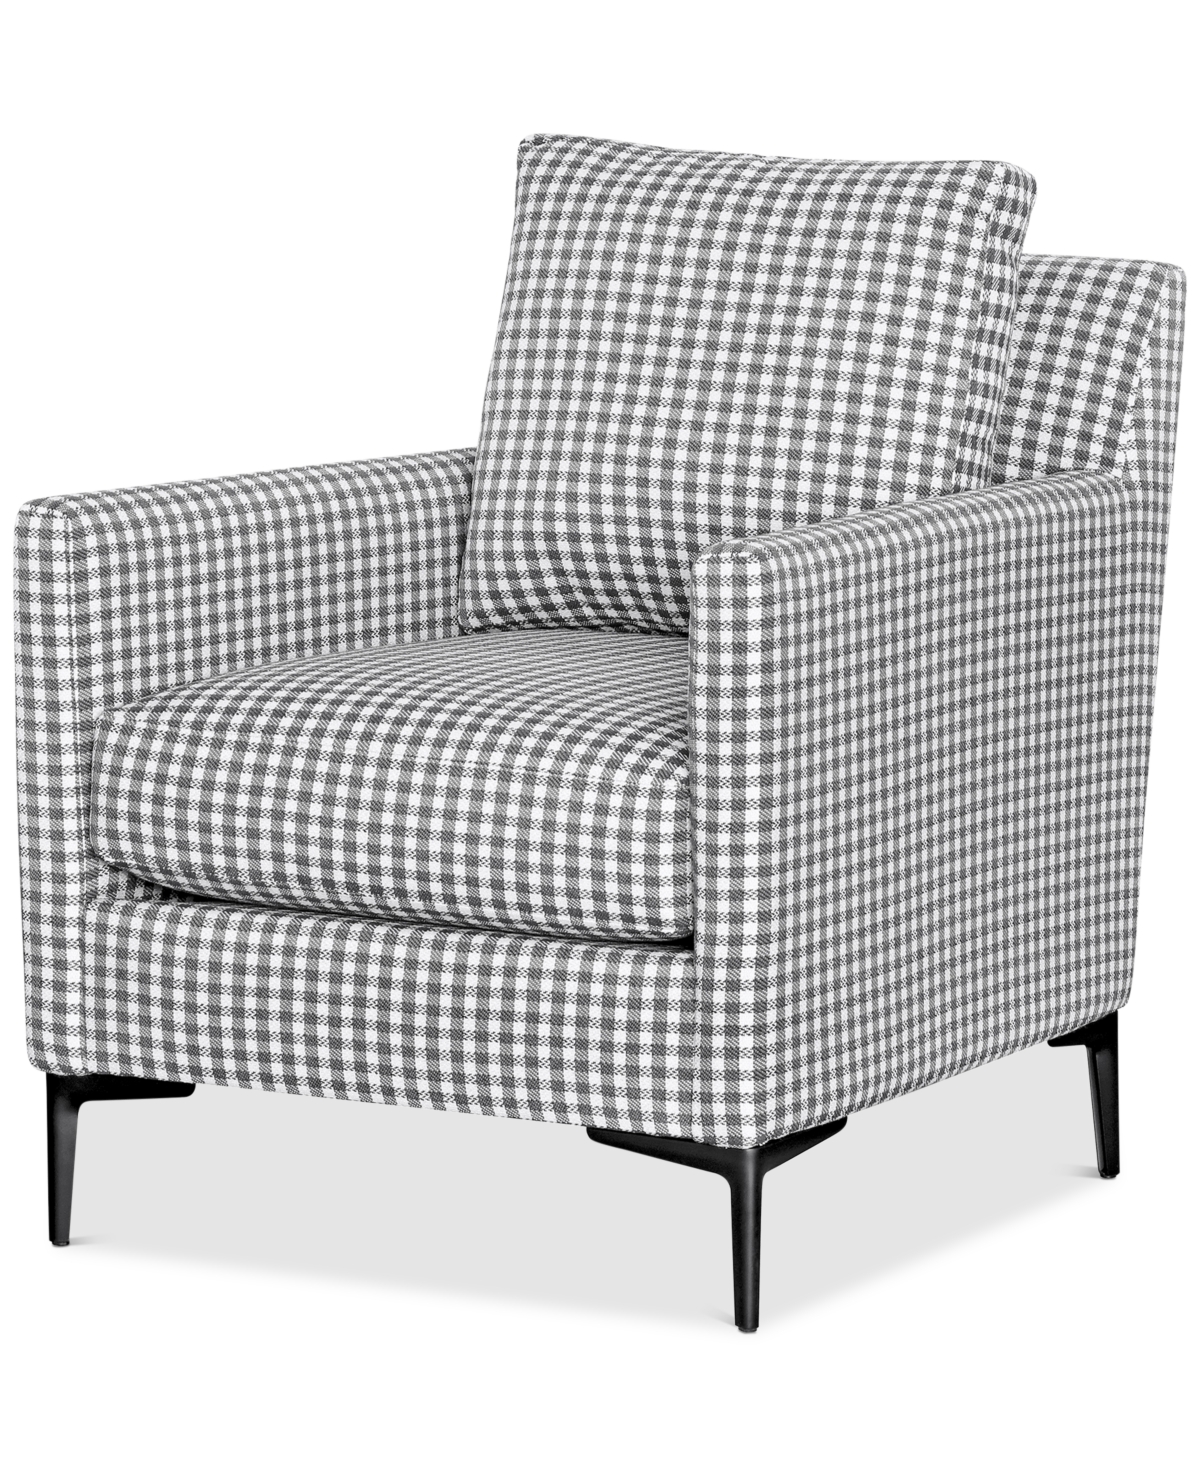 Furniture Closeout! Laylanna 28" Fabric Patterned Accent Chair, Created For Macy's In Grey